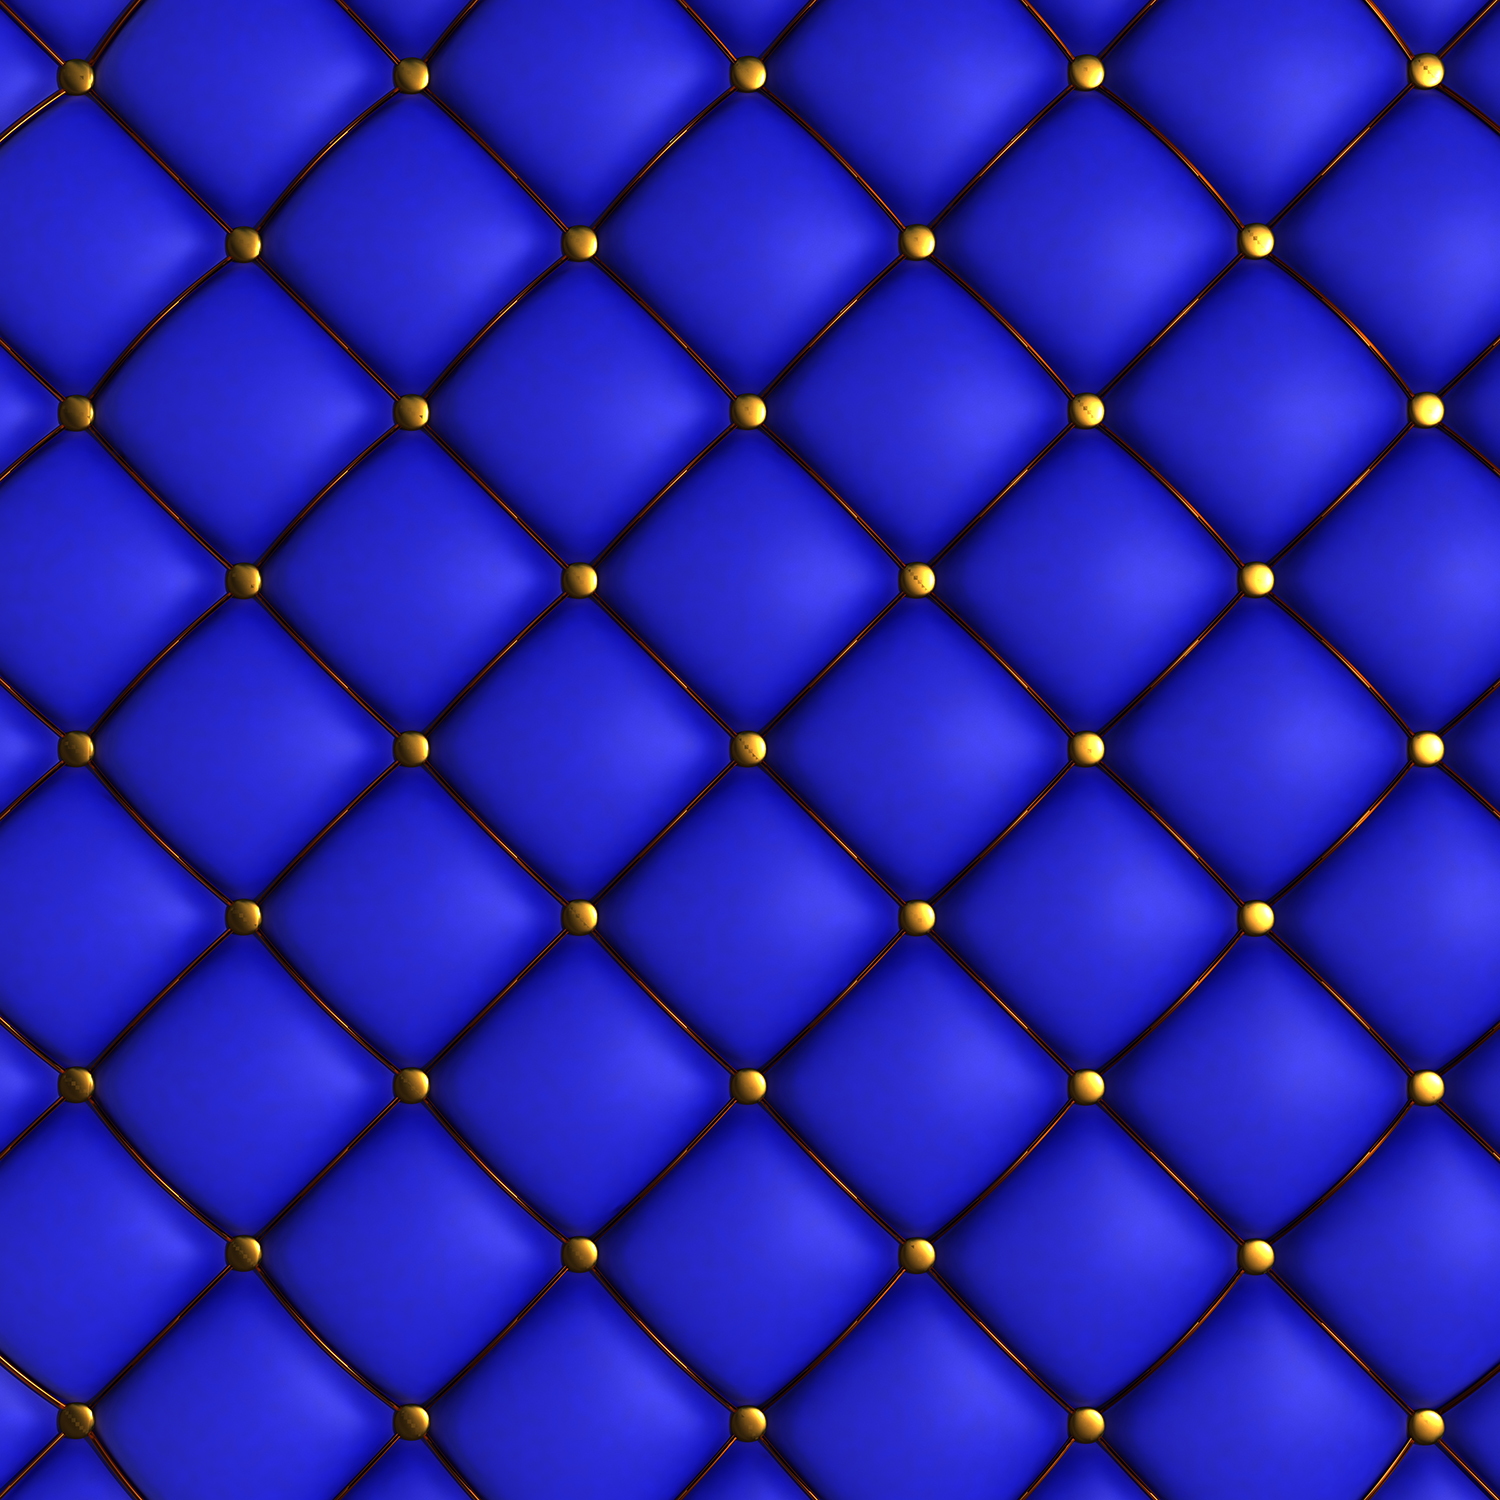 Buy Vibrant Blue Square Wallpaper Online in India at Best Price